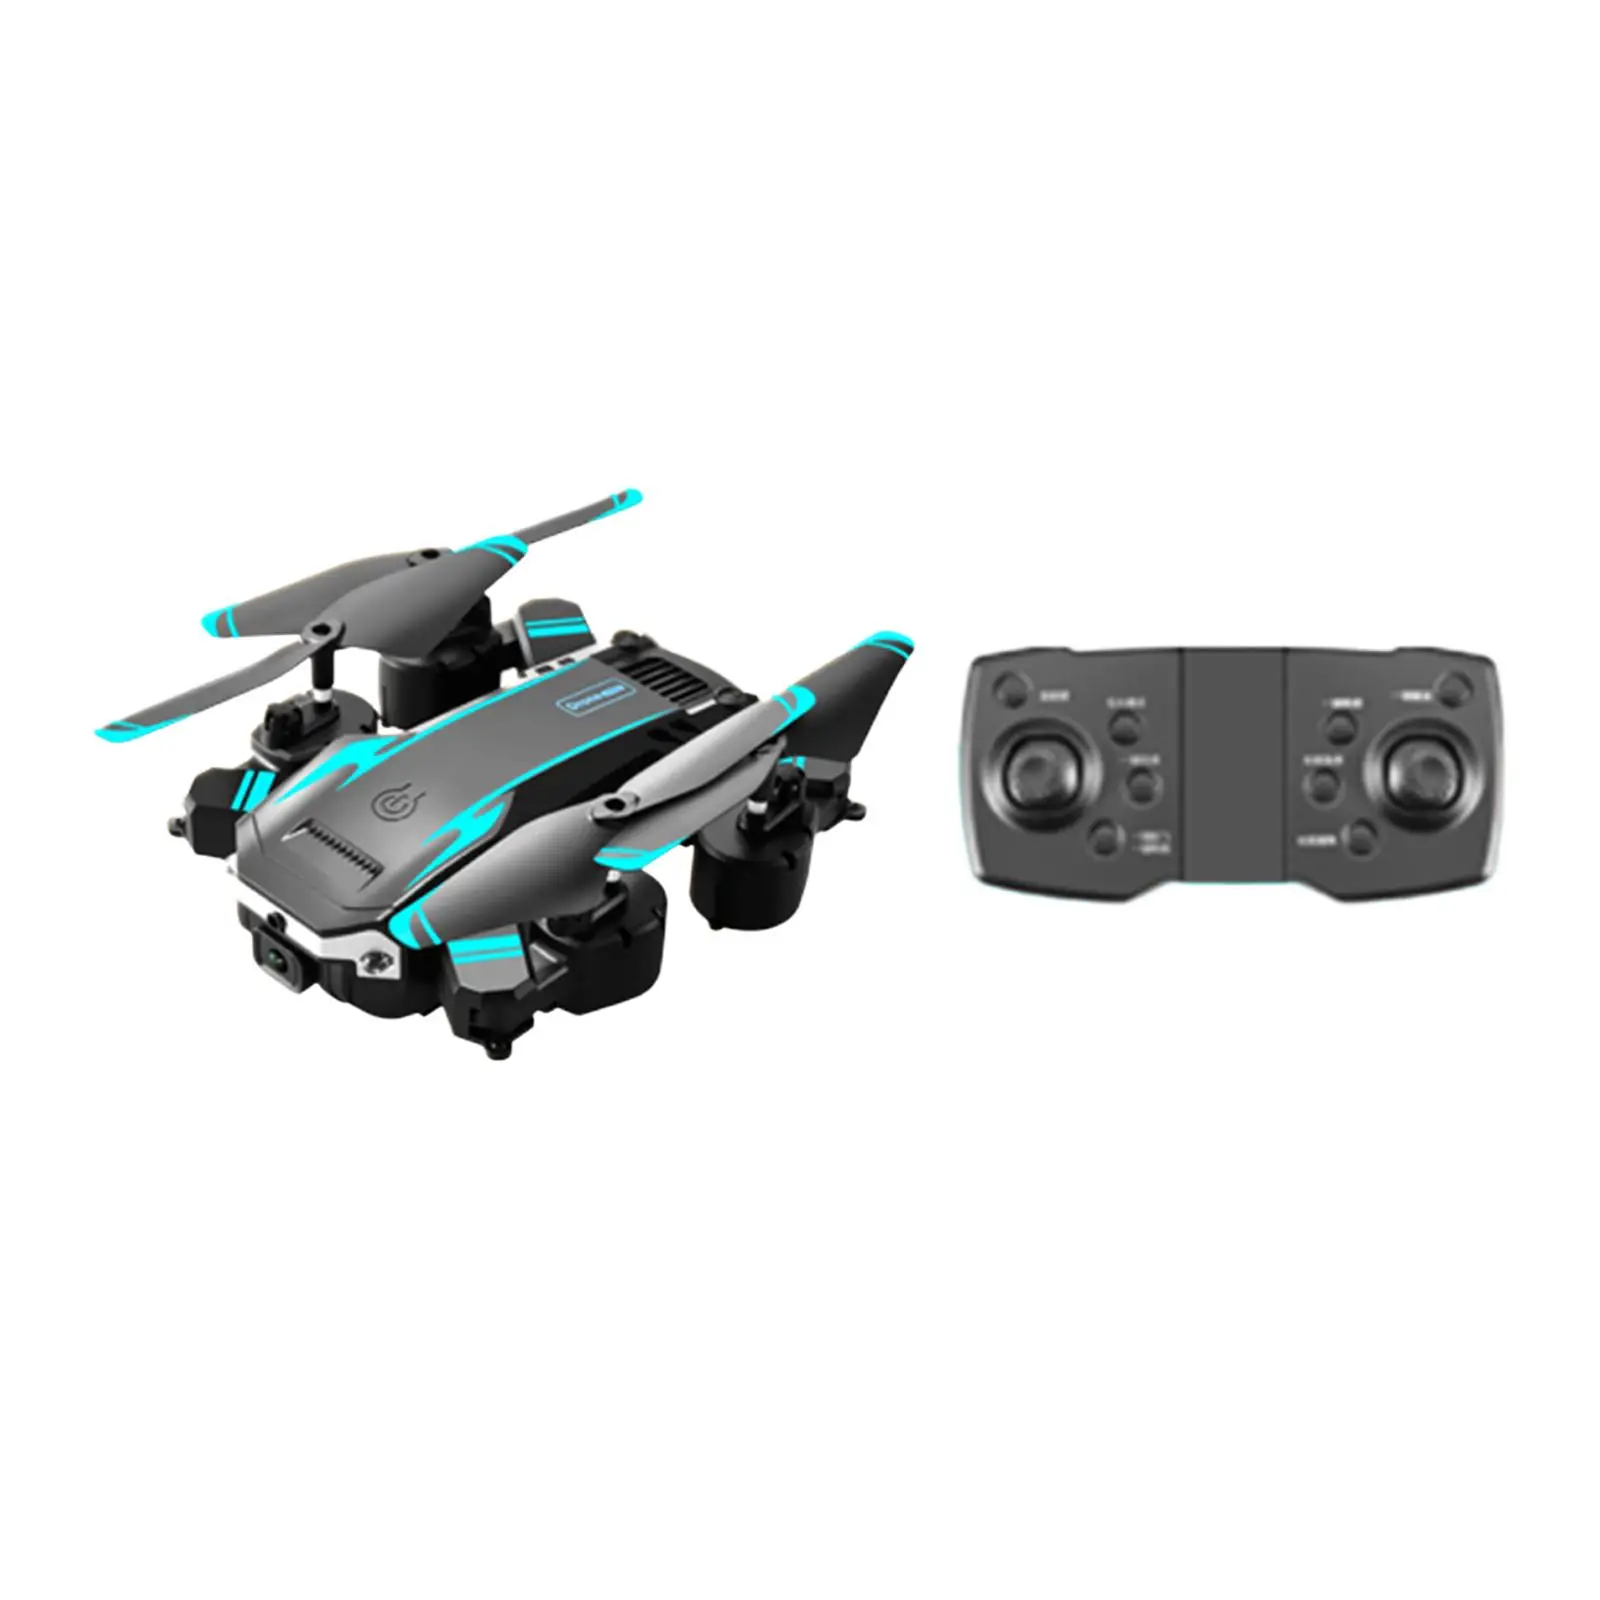 4K Mini Drone Professional Foldable Quadcopter Toys Kids Toys Remote Control Drone for Boys Girls Beginners Teens Holiday Gift